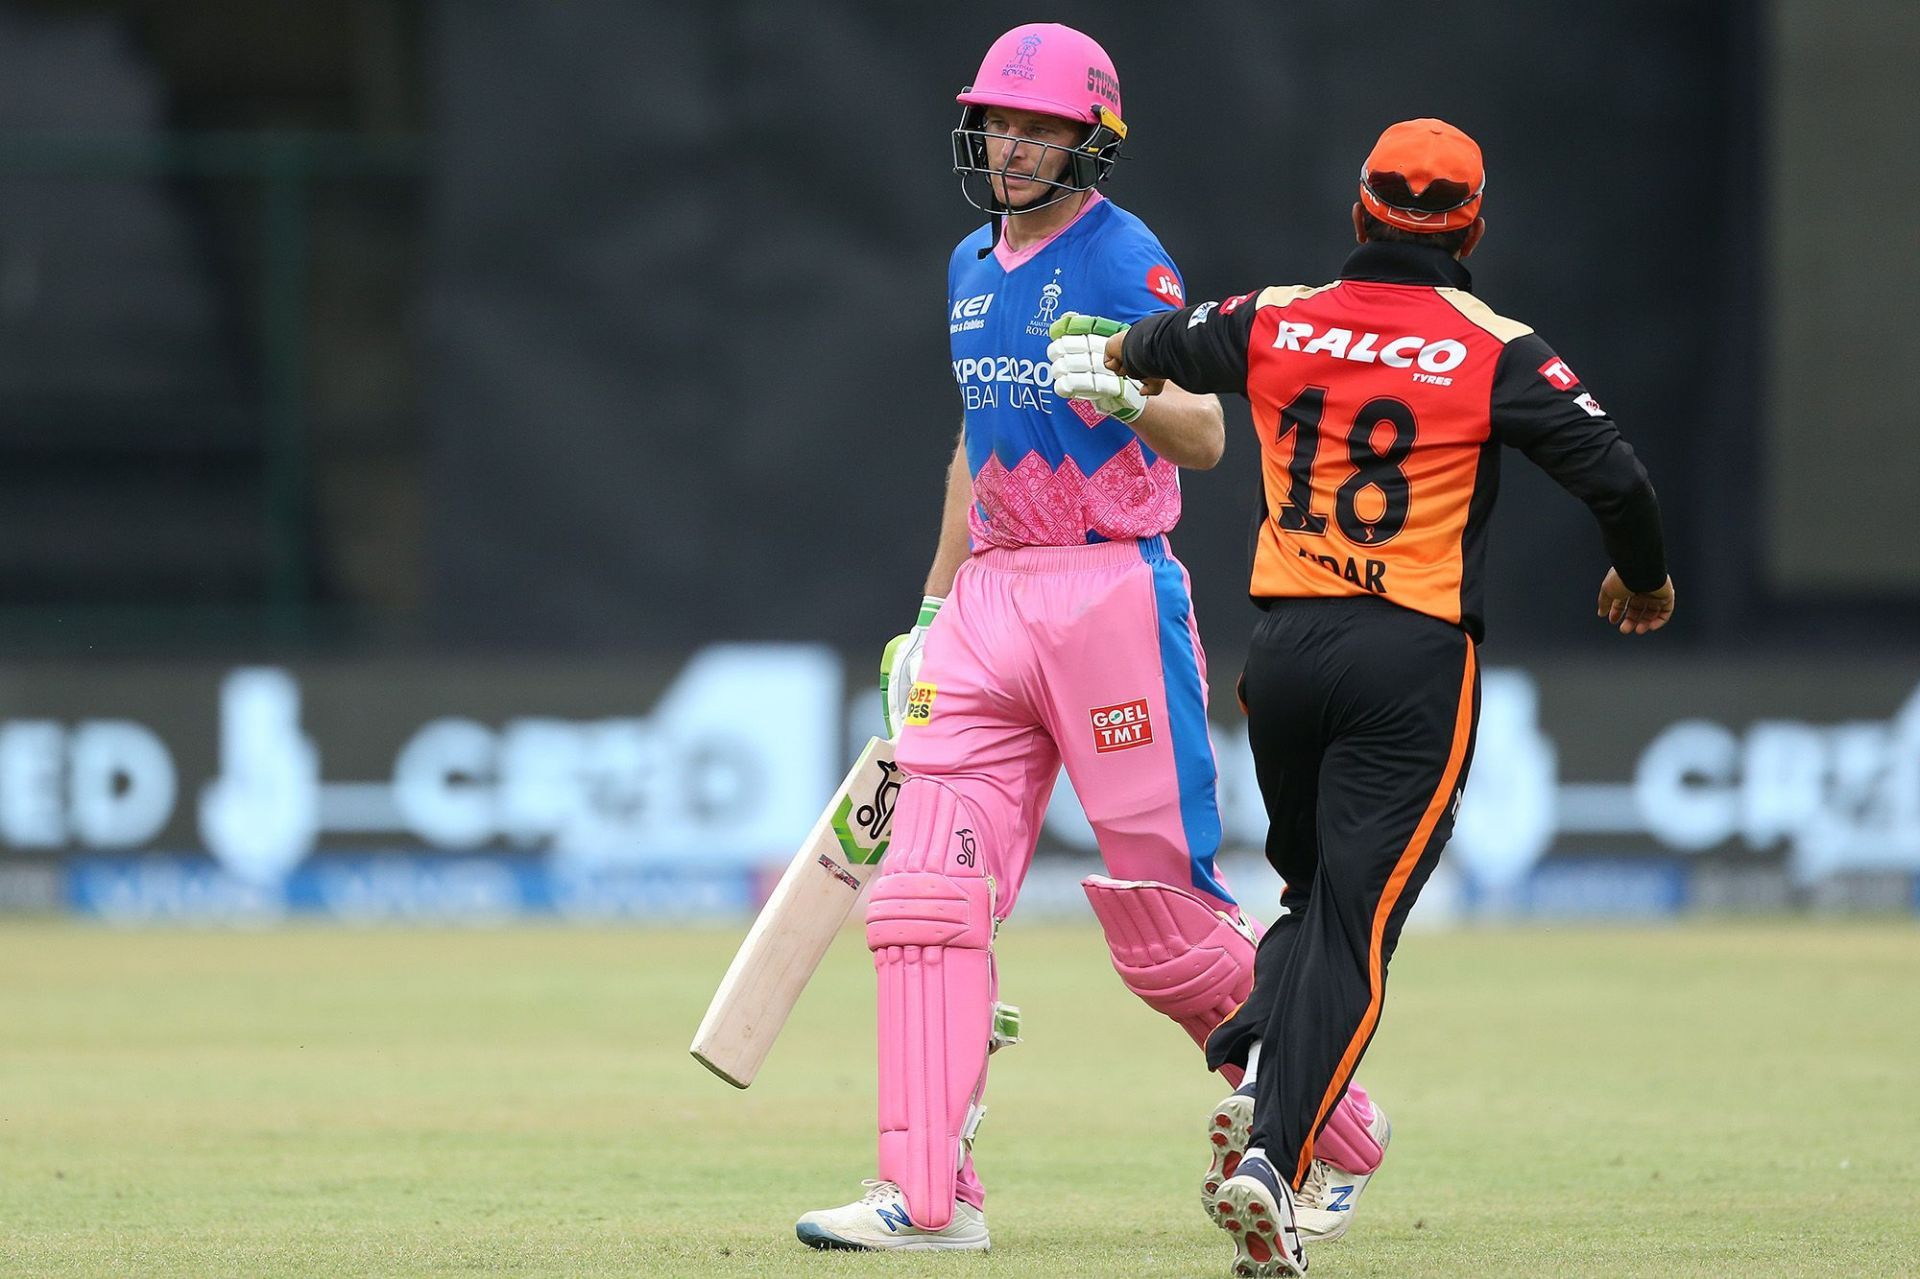 Jos Buttler scored his maiden Indian Premier League hundred last year for the Rajasthan Royals (Image Courtesy: IPLT20.com)